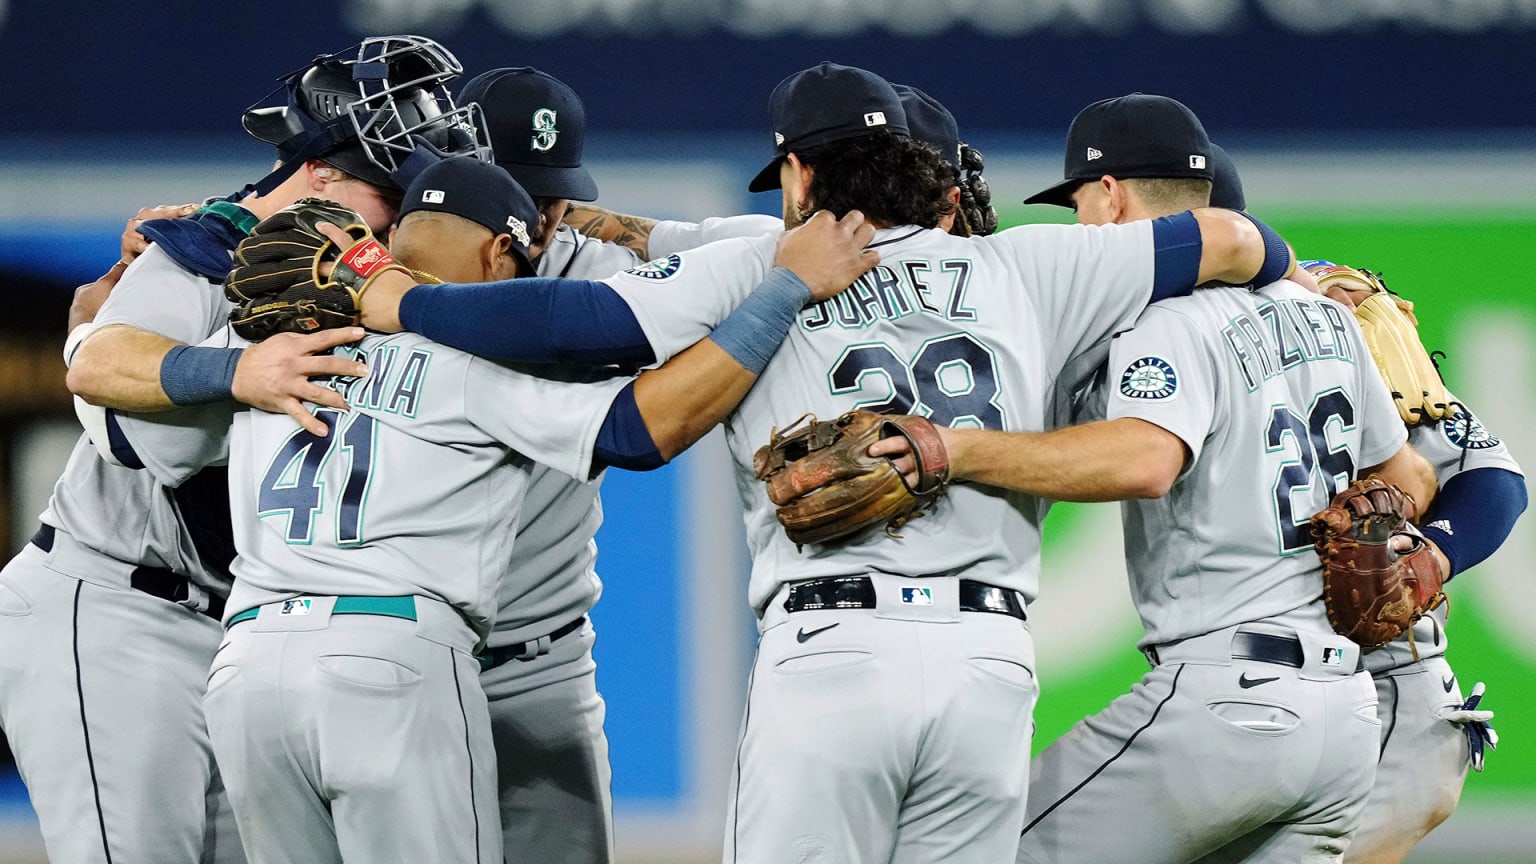 Mariners players form a circle, arms around each other, to celebrate their victory